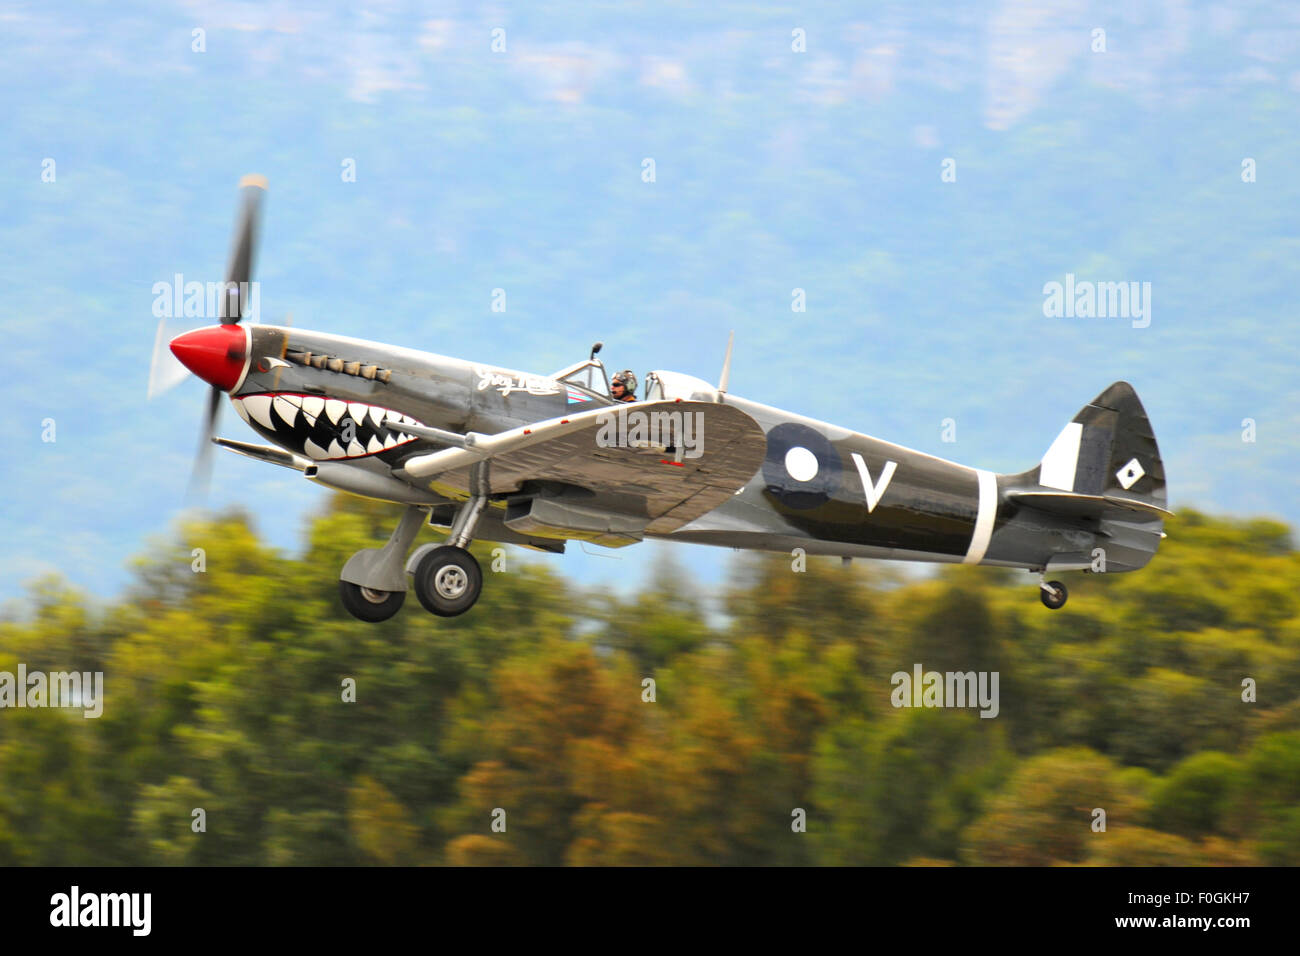 Spitfire fighter aircraft Stock Photo